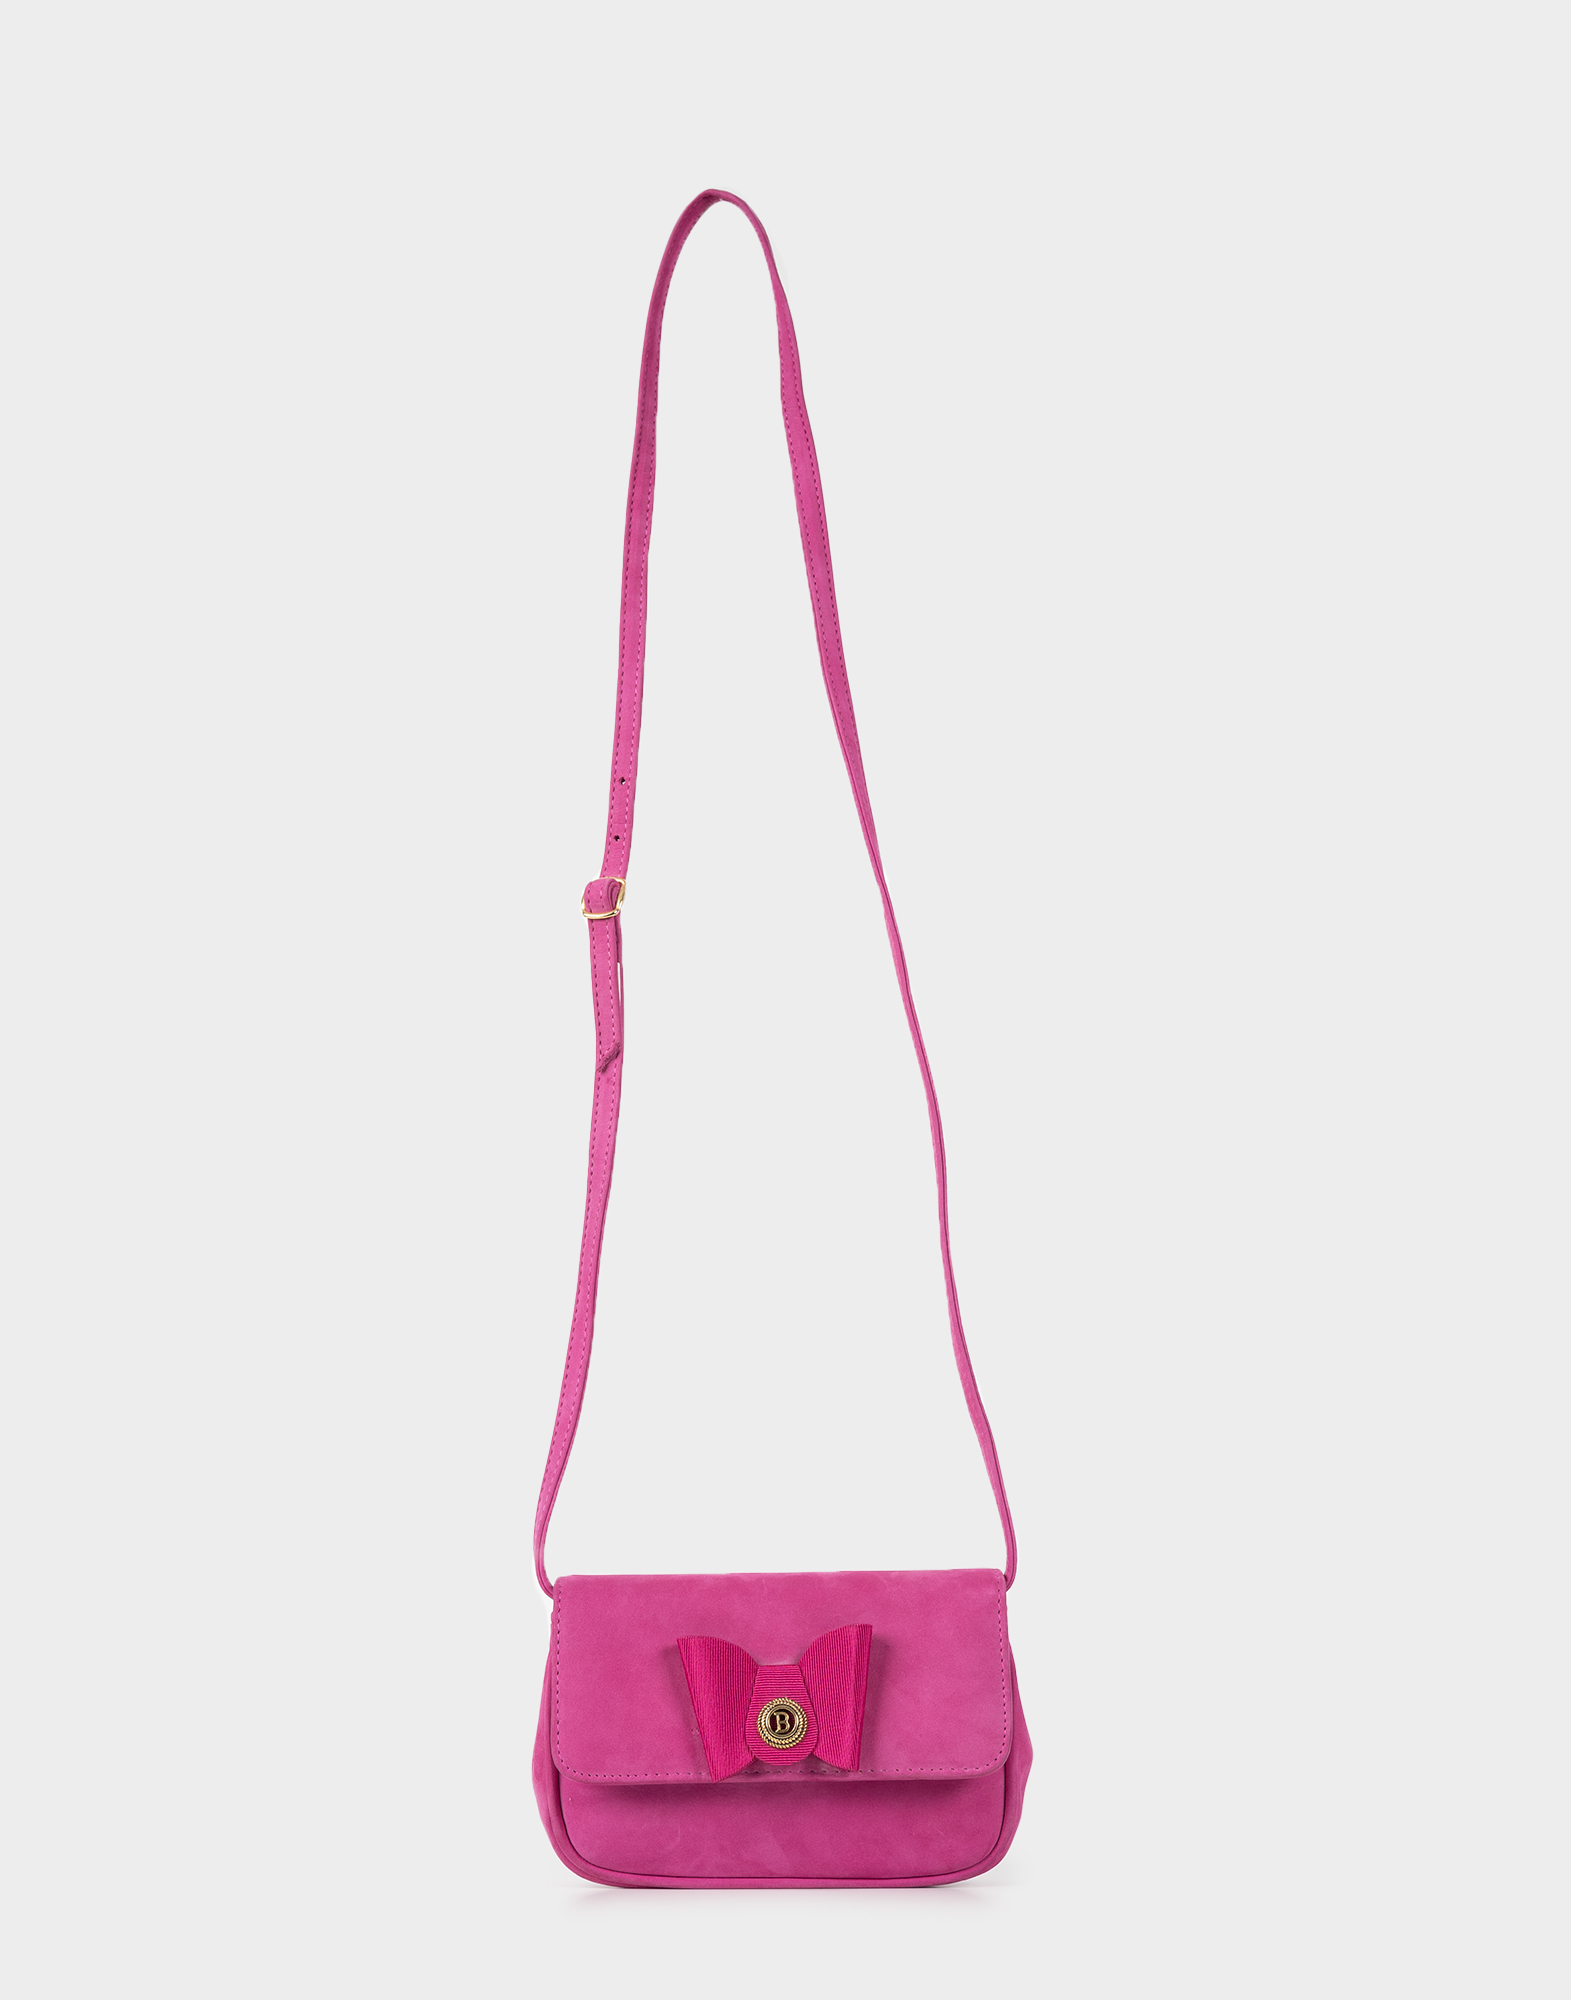 Small pink suede-like fabric bag with a long adjustable shoulder strap, flap closure, and a satin bow on the front.